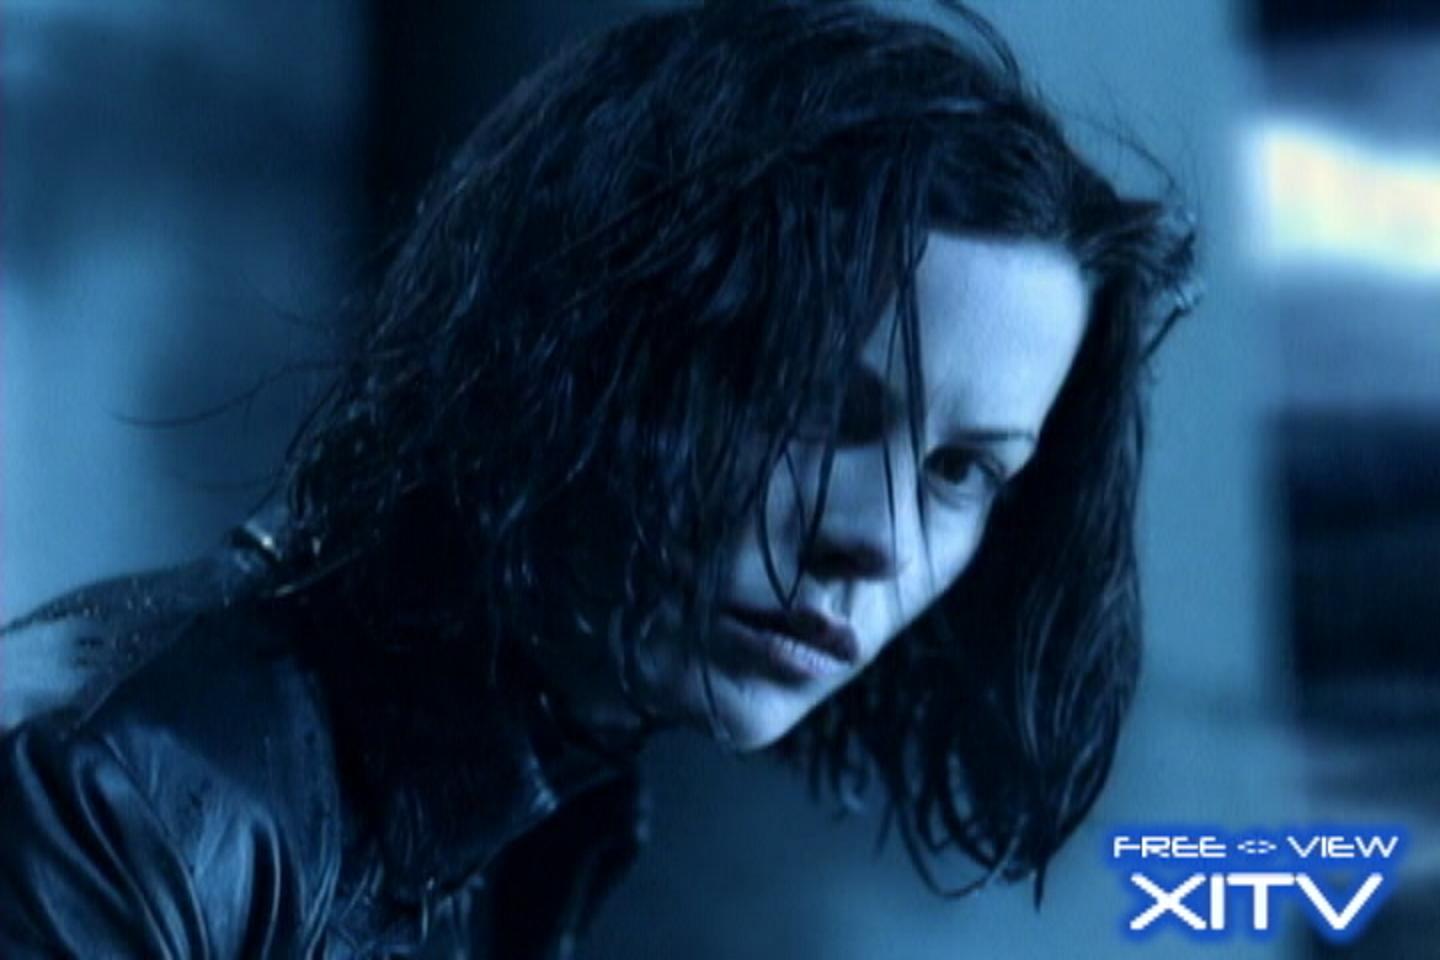 Watch Now! XITV FREE <> VIEW™ Underworld! Starring Kate Beckinsale! XITV Is Must See TV!